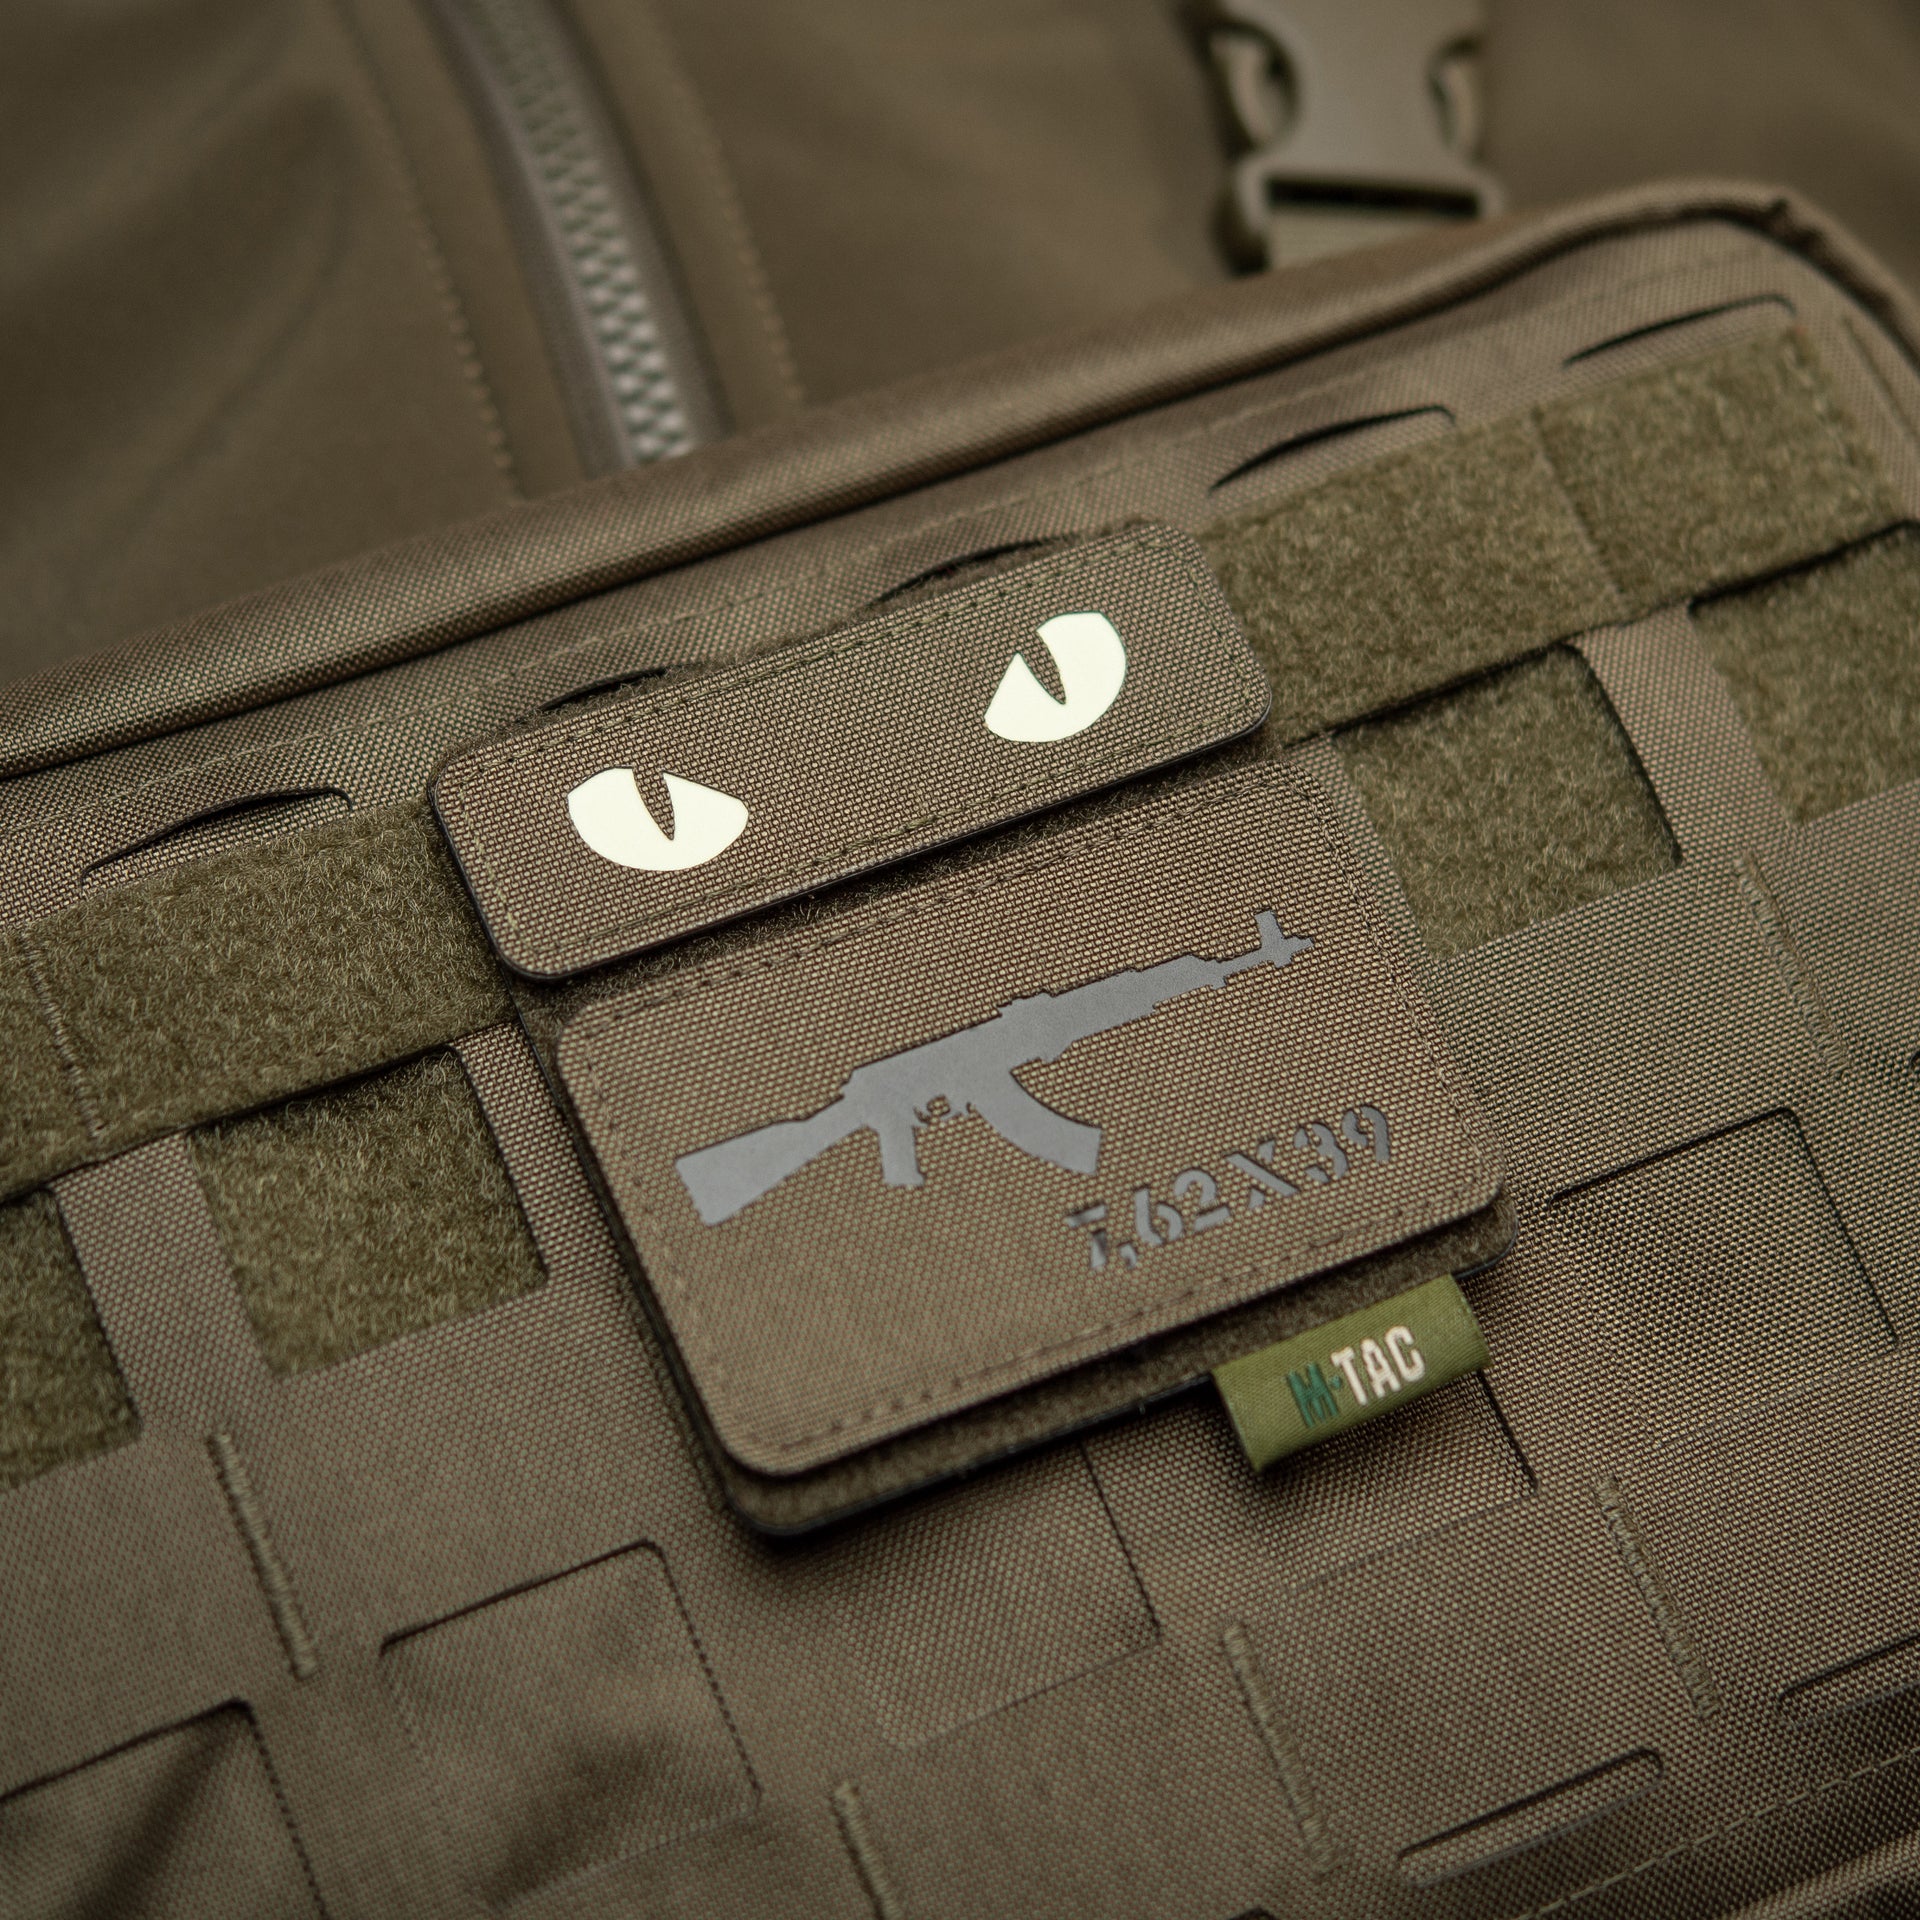 M-Tac Tactical Morale Patches Hook and Loop Display Board Molle 3.1 x 3.2 inches